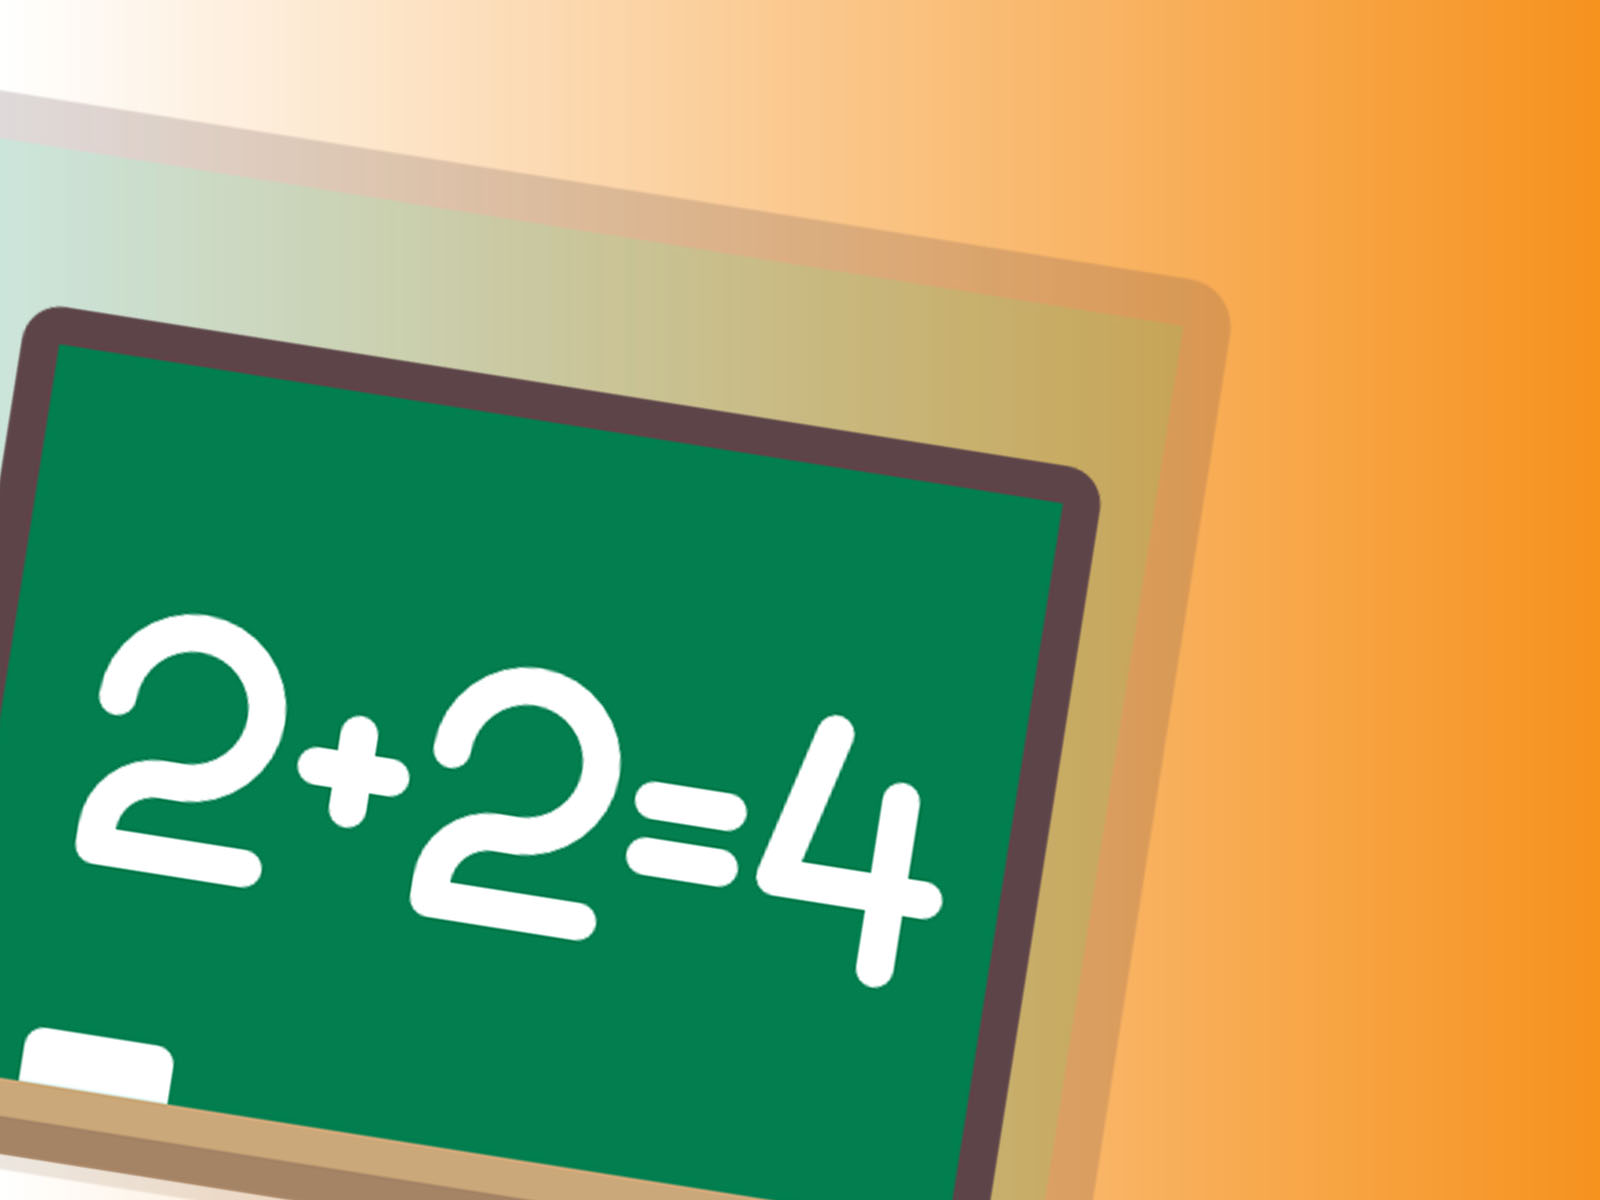 math-board-powerpoint-templates-border-frames-education-orange-free-ppt-backgrounds-and